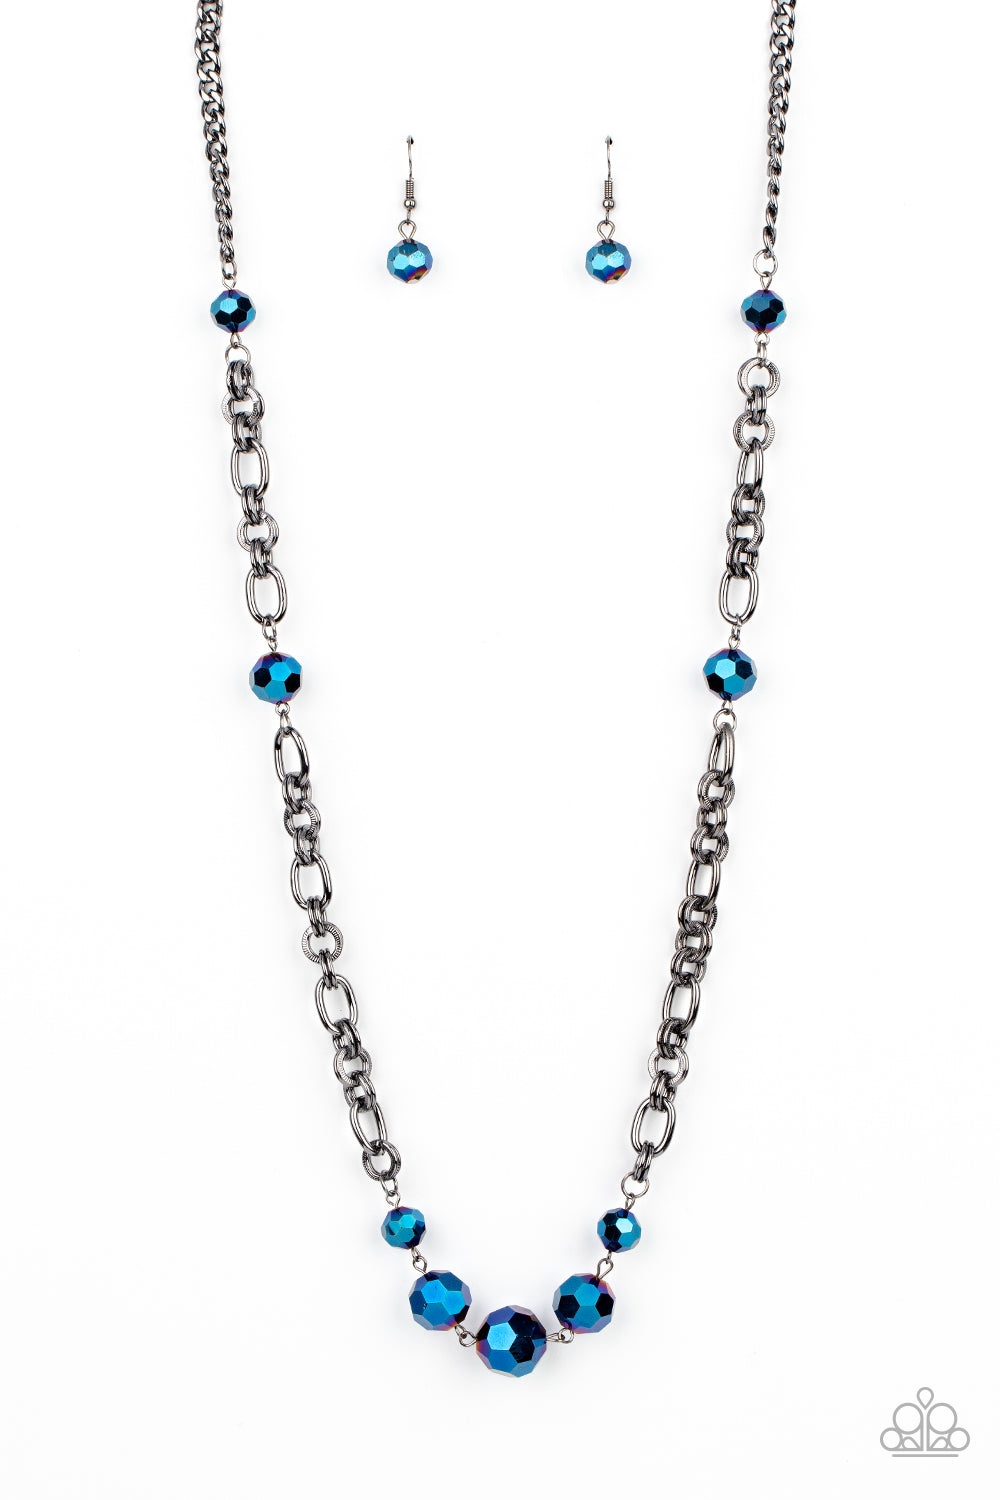 Prismatic Pick-Me-Up Multi Necklace - Paparazzi Accessories  Featuring an oil spill iridescence, faceted metallic blue beads adorn sections of chunky gunmetal chains across the chest for a gritty glamorous fashion. Features an adjustable clasp closure.  Sold as one individual necklace. Includes one pair of matching earrings.